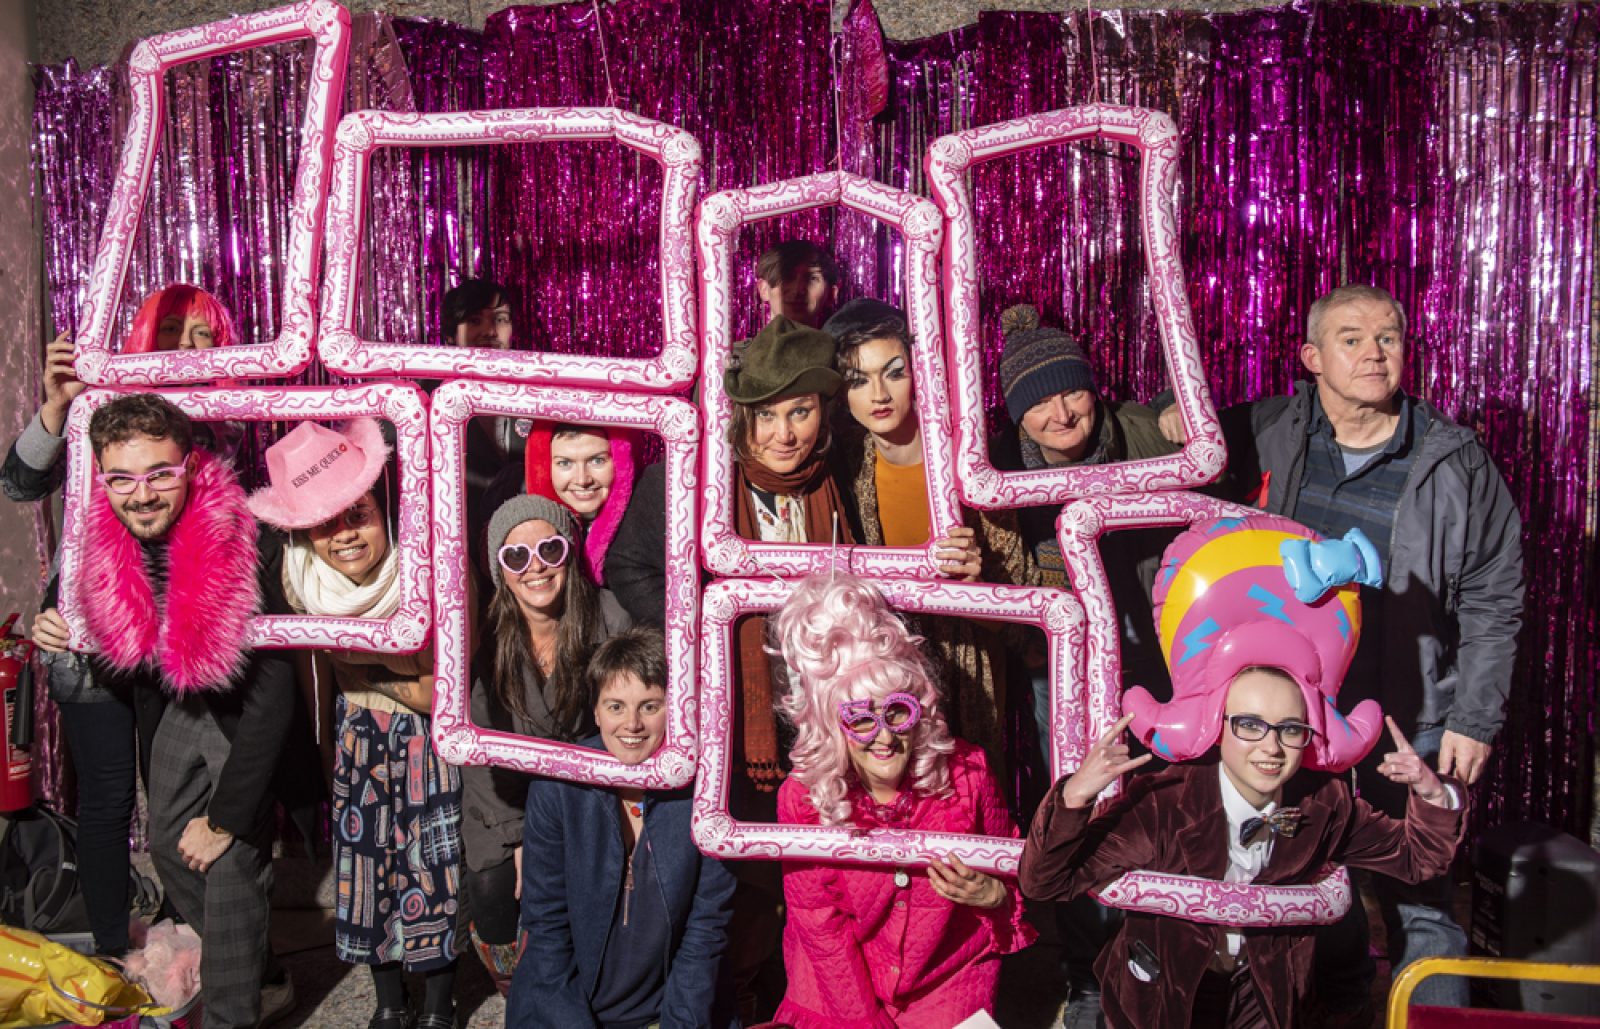 In front of a bright pink glitter curtain a group of people stand and kneel with pink accessories on and framed with pink inflatable frames. They are smiling and posing for a photograph.